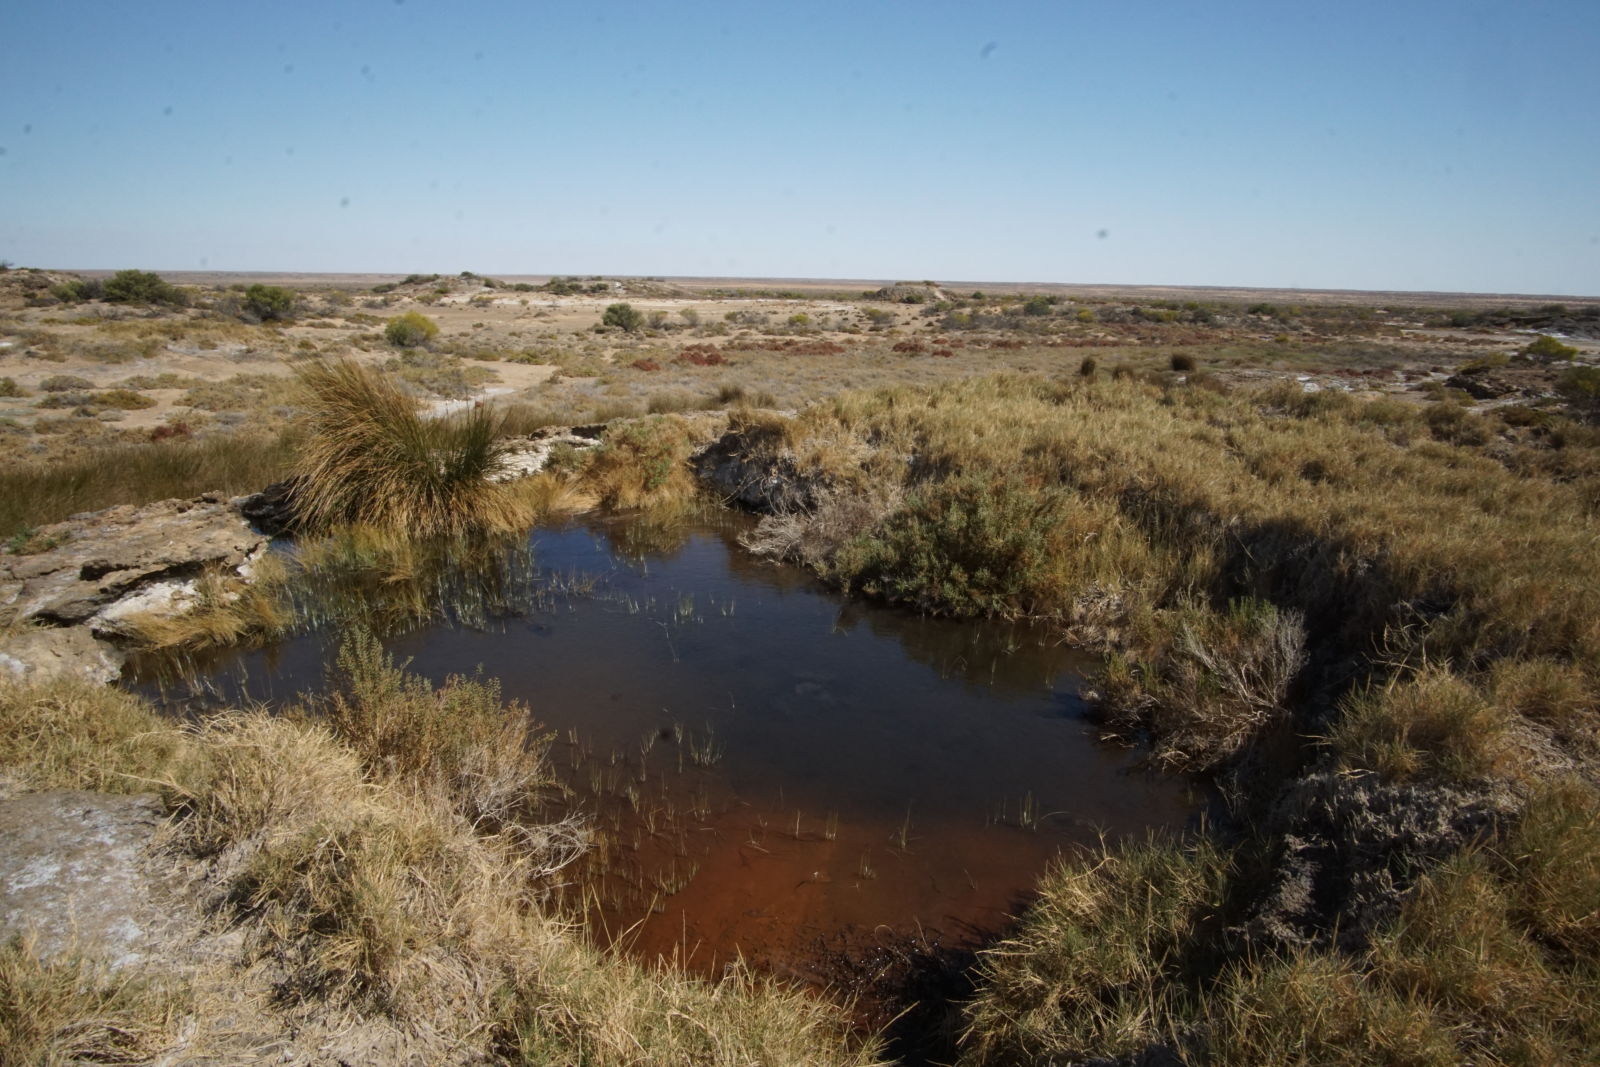 Mound Springs are fresh water springs that bubble up in the middle of this very arid region. I think they are cool.